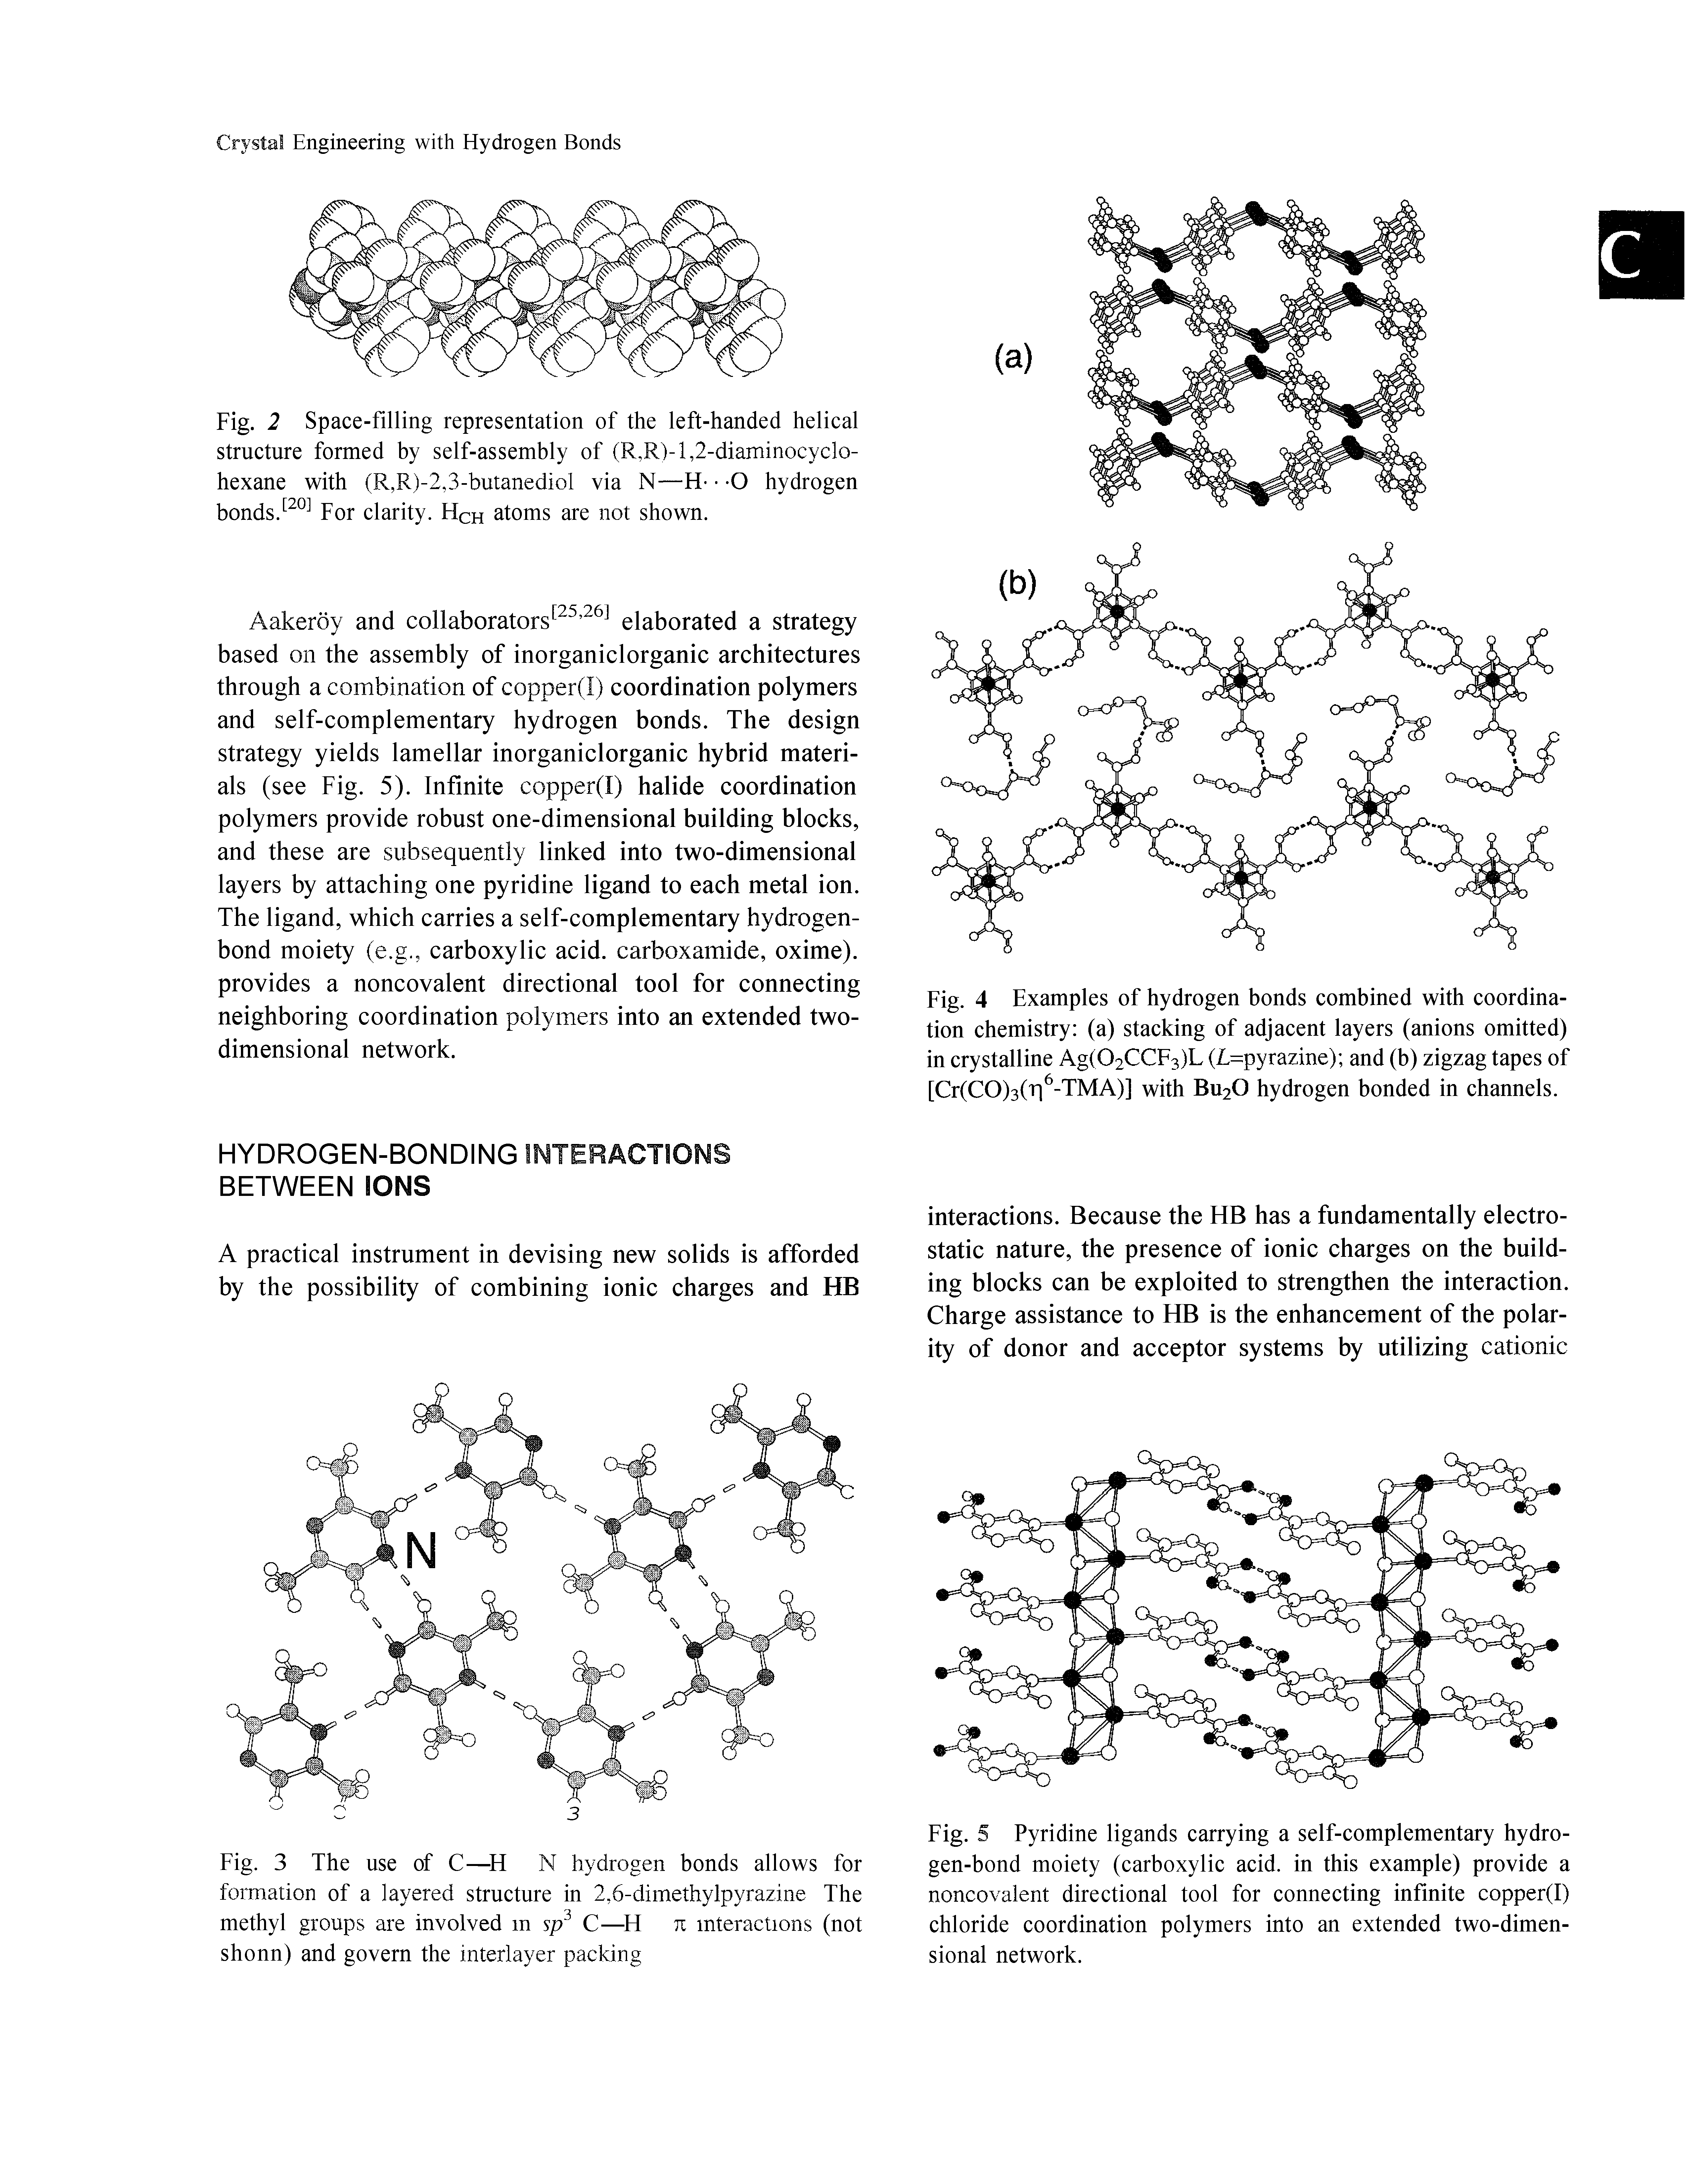 Fig. 5 Pyridine ligands carrying a self-complementary hydrogen-bond moiety (carboxylic acid, in this example) provide a noncovalent directional tool for connecting infinite copper(I) chloride coordination polymers into an extended two-dimensional network.